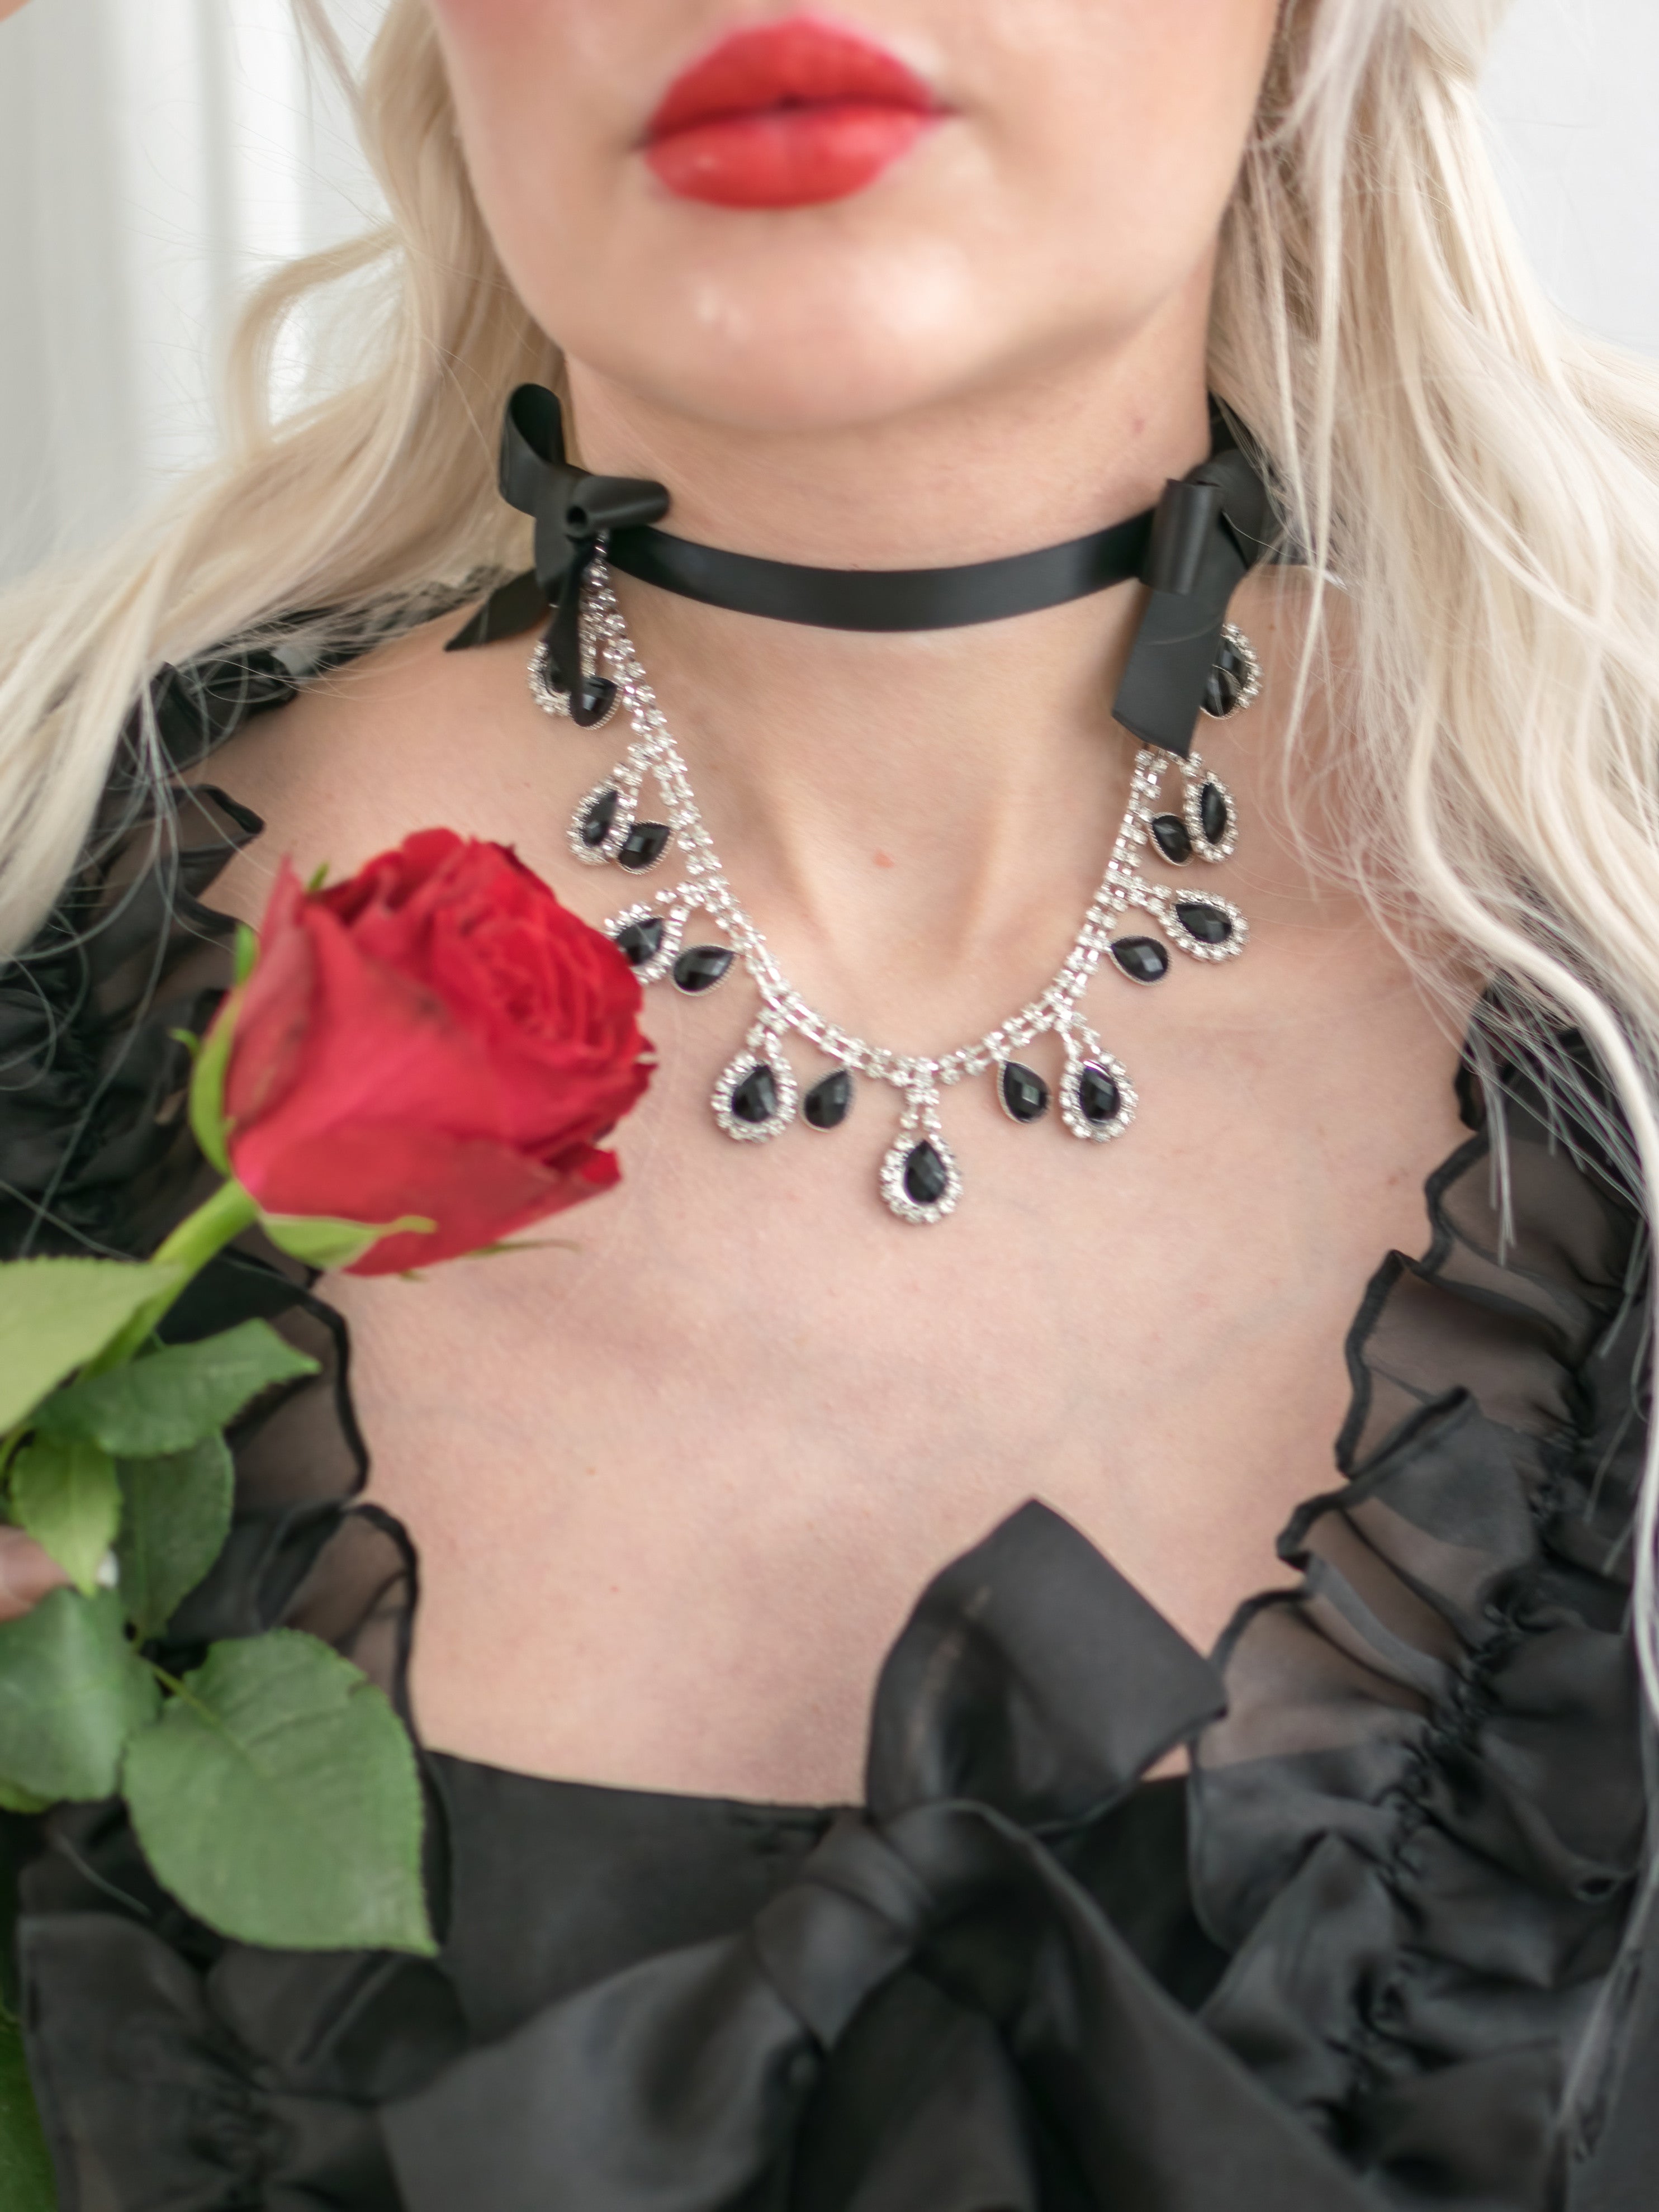 Black Choker, Lace, Gothic Choker, Gothic Jewelry, Black Necklace, Goth  Wedding, Goth Bridesmaids Jewelry, Gothic Gift for Her Christmas - Etsy |  Black lace choker necklace, Gothic choker necklace, Lace choker necklace